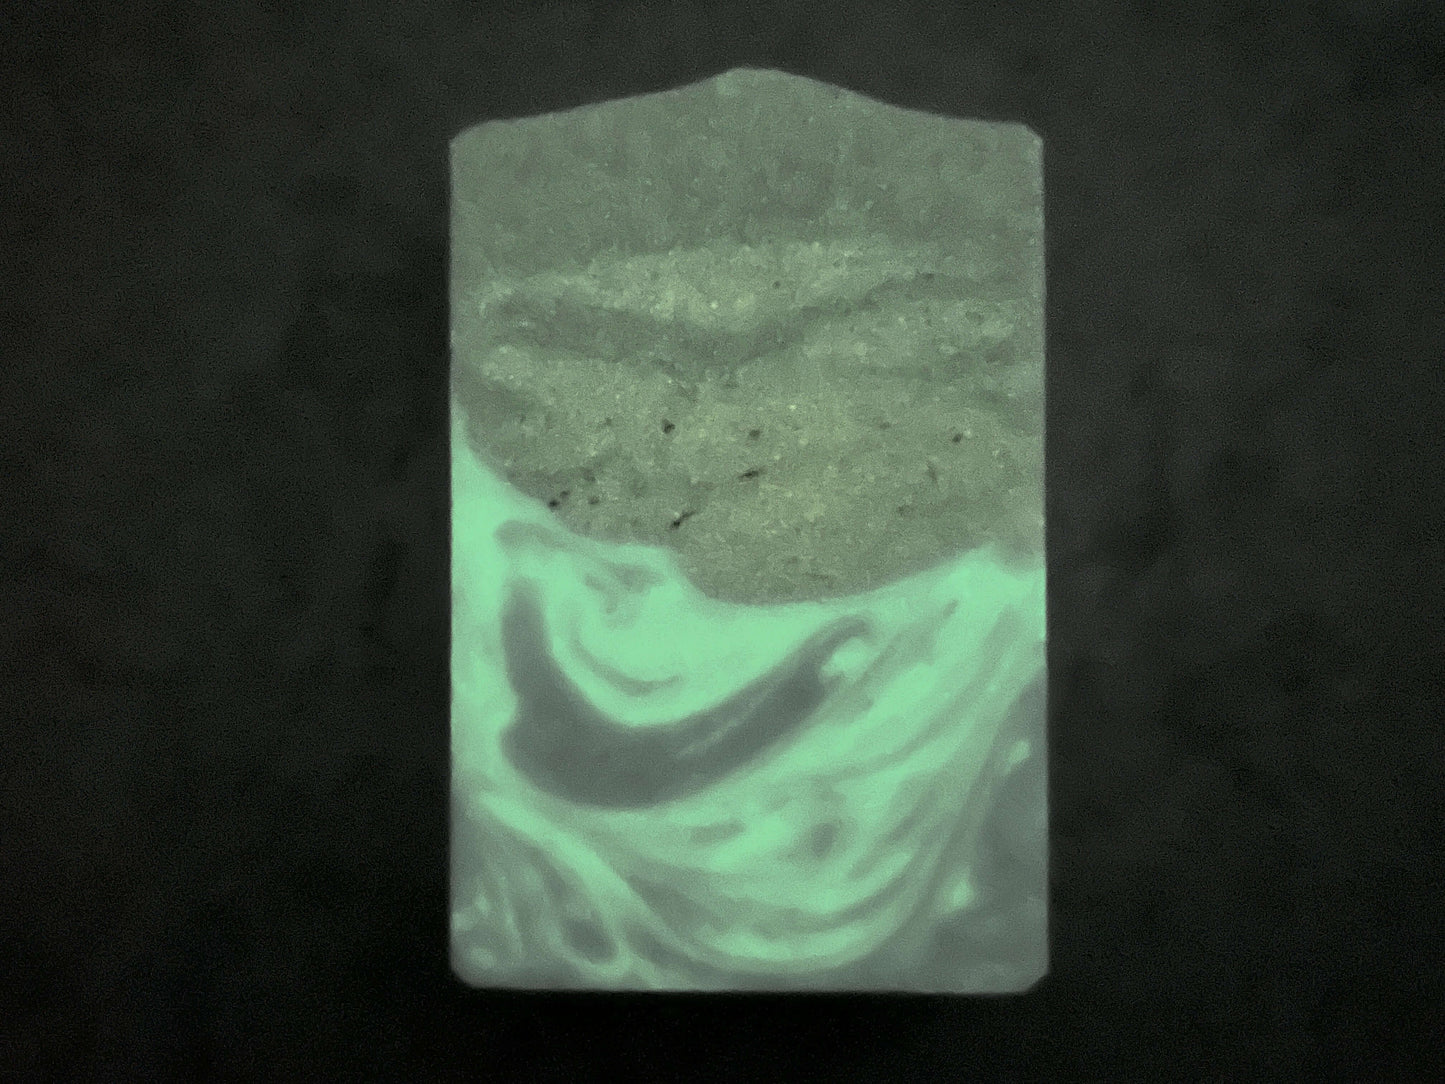 Purple and blue soap in honor of Murf on Star Trek: Prodigy that glows in the dark.